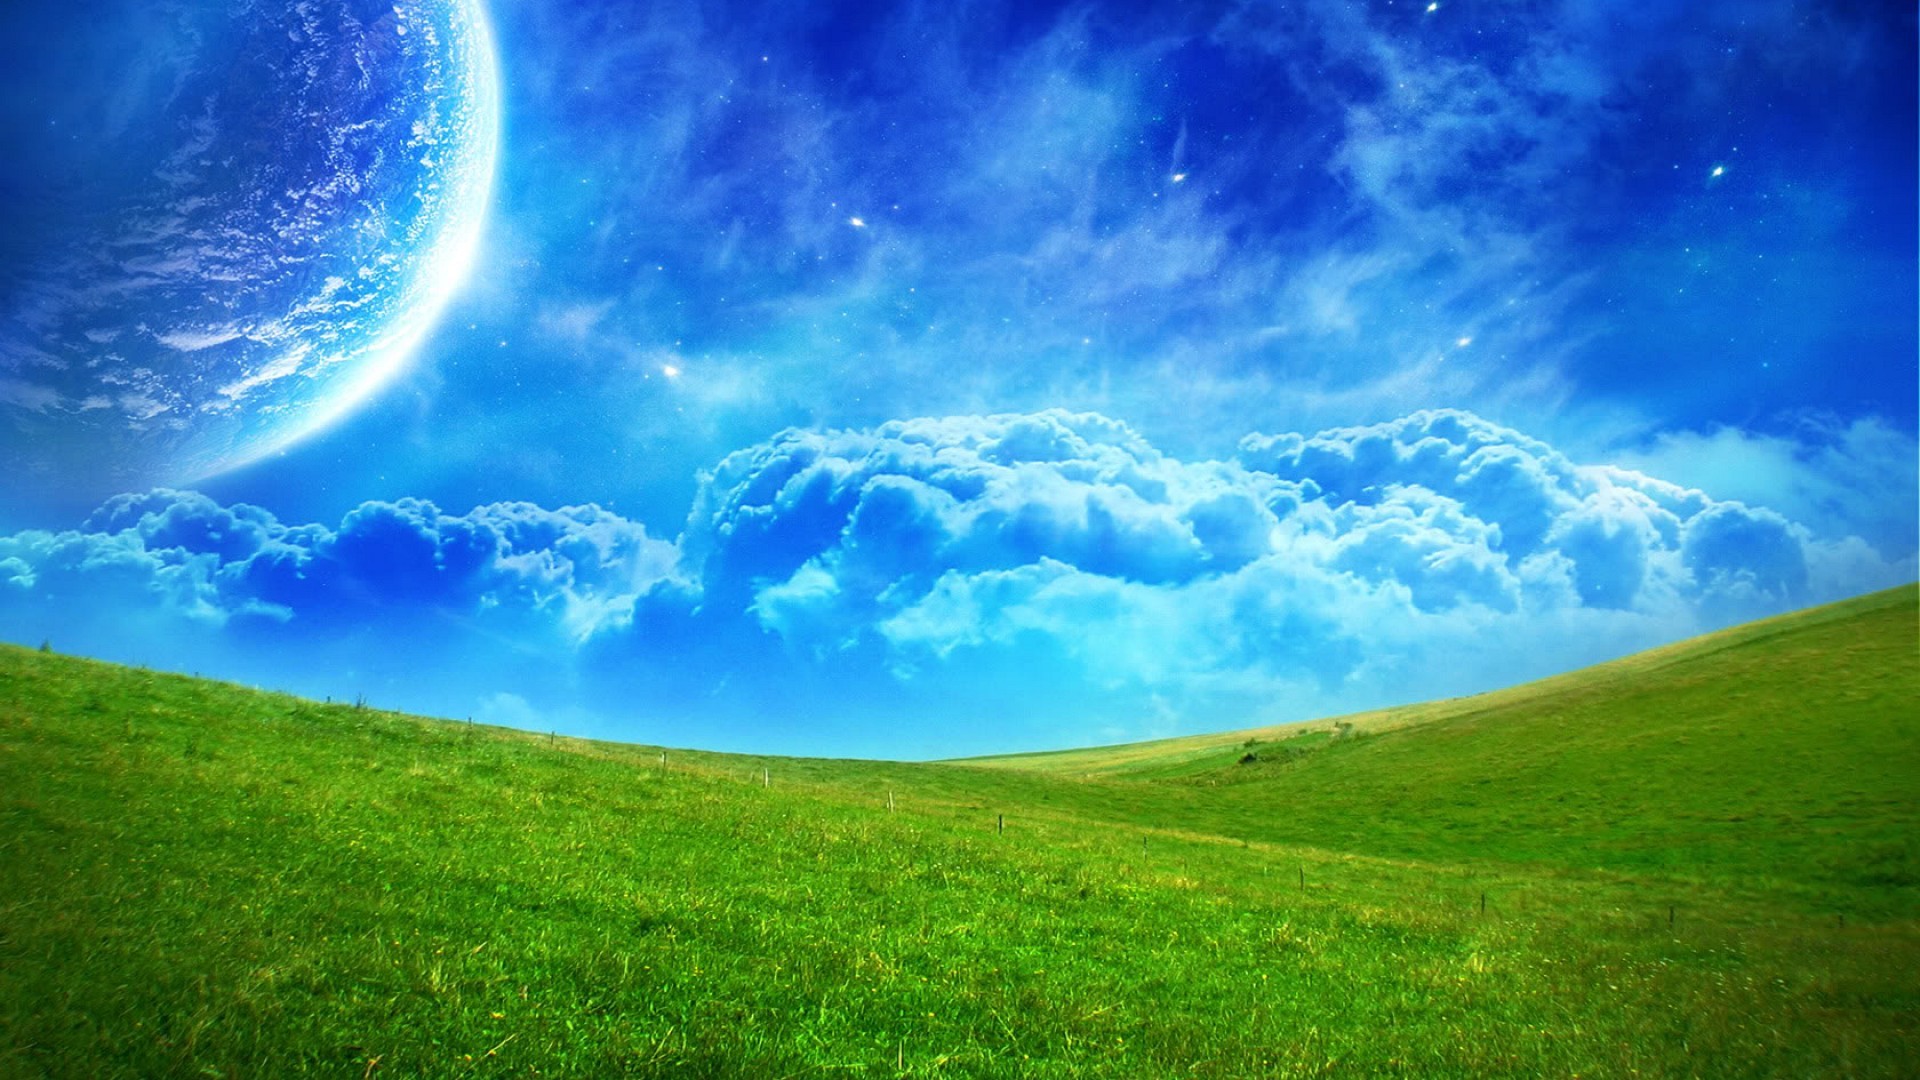 1920x1080 Homepage Â» Nature and Landscape Â» Nature HD wallpaper  (3)